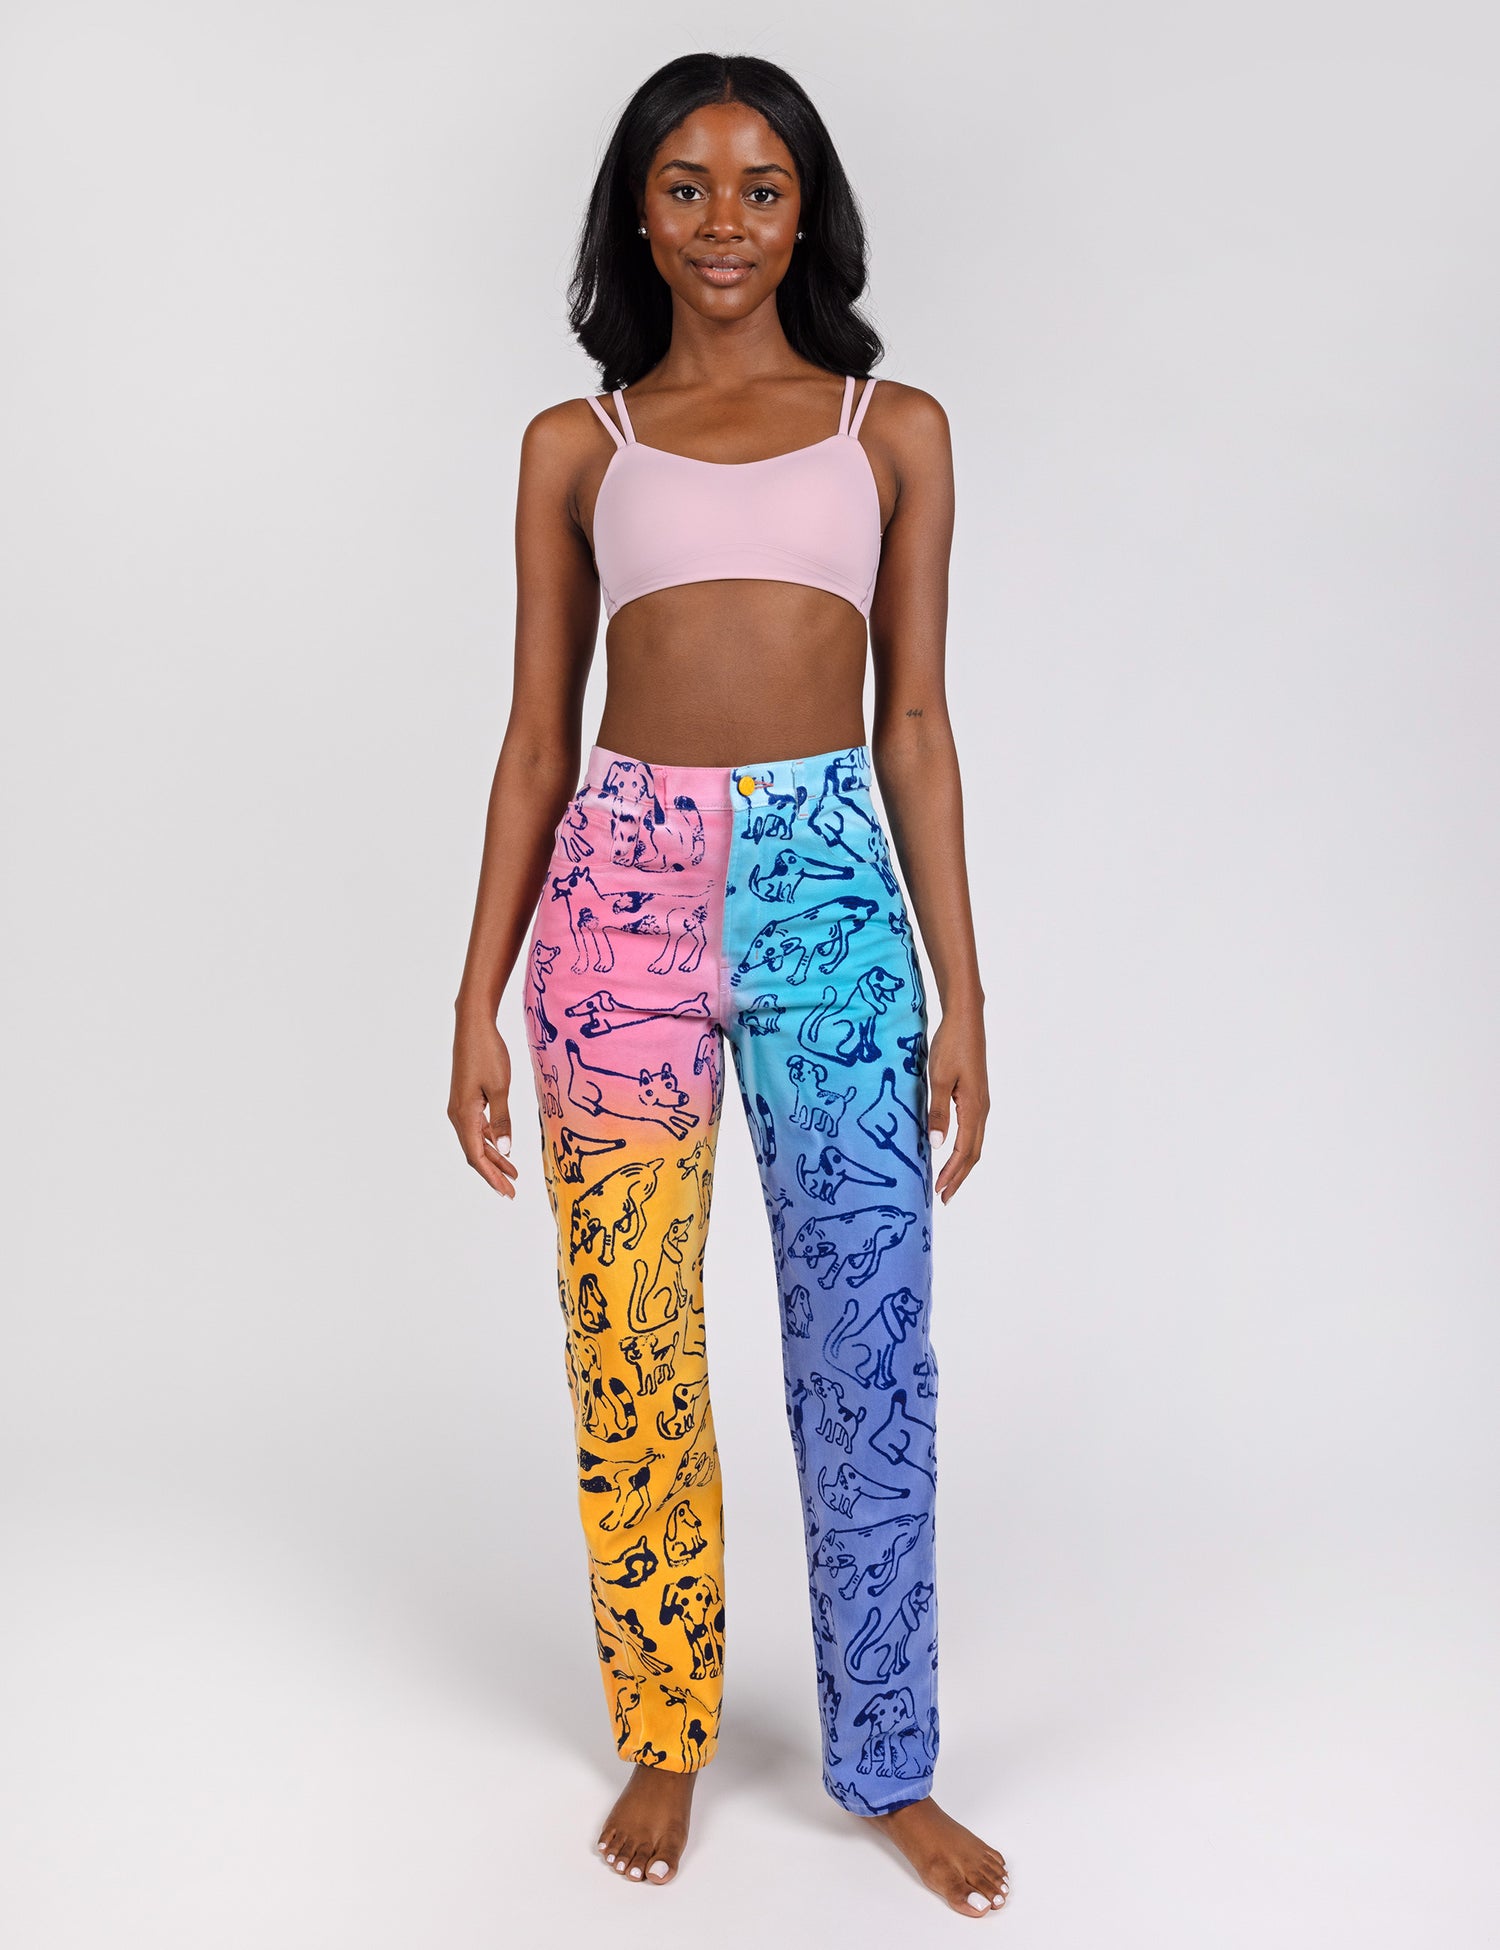 Woman wearing colorful dog print jeans